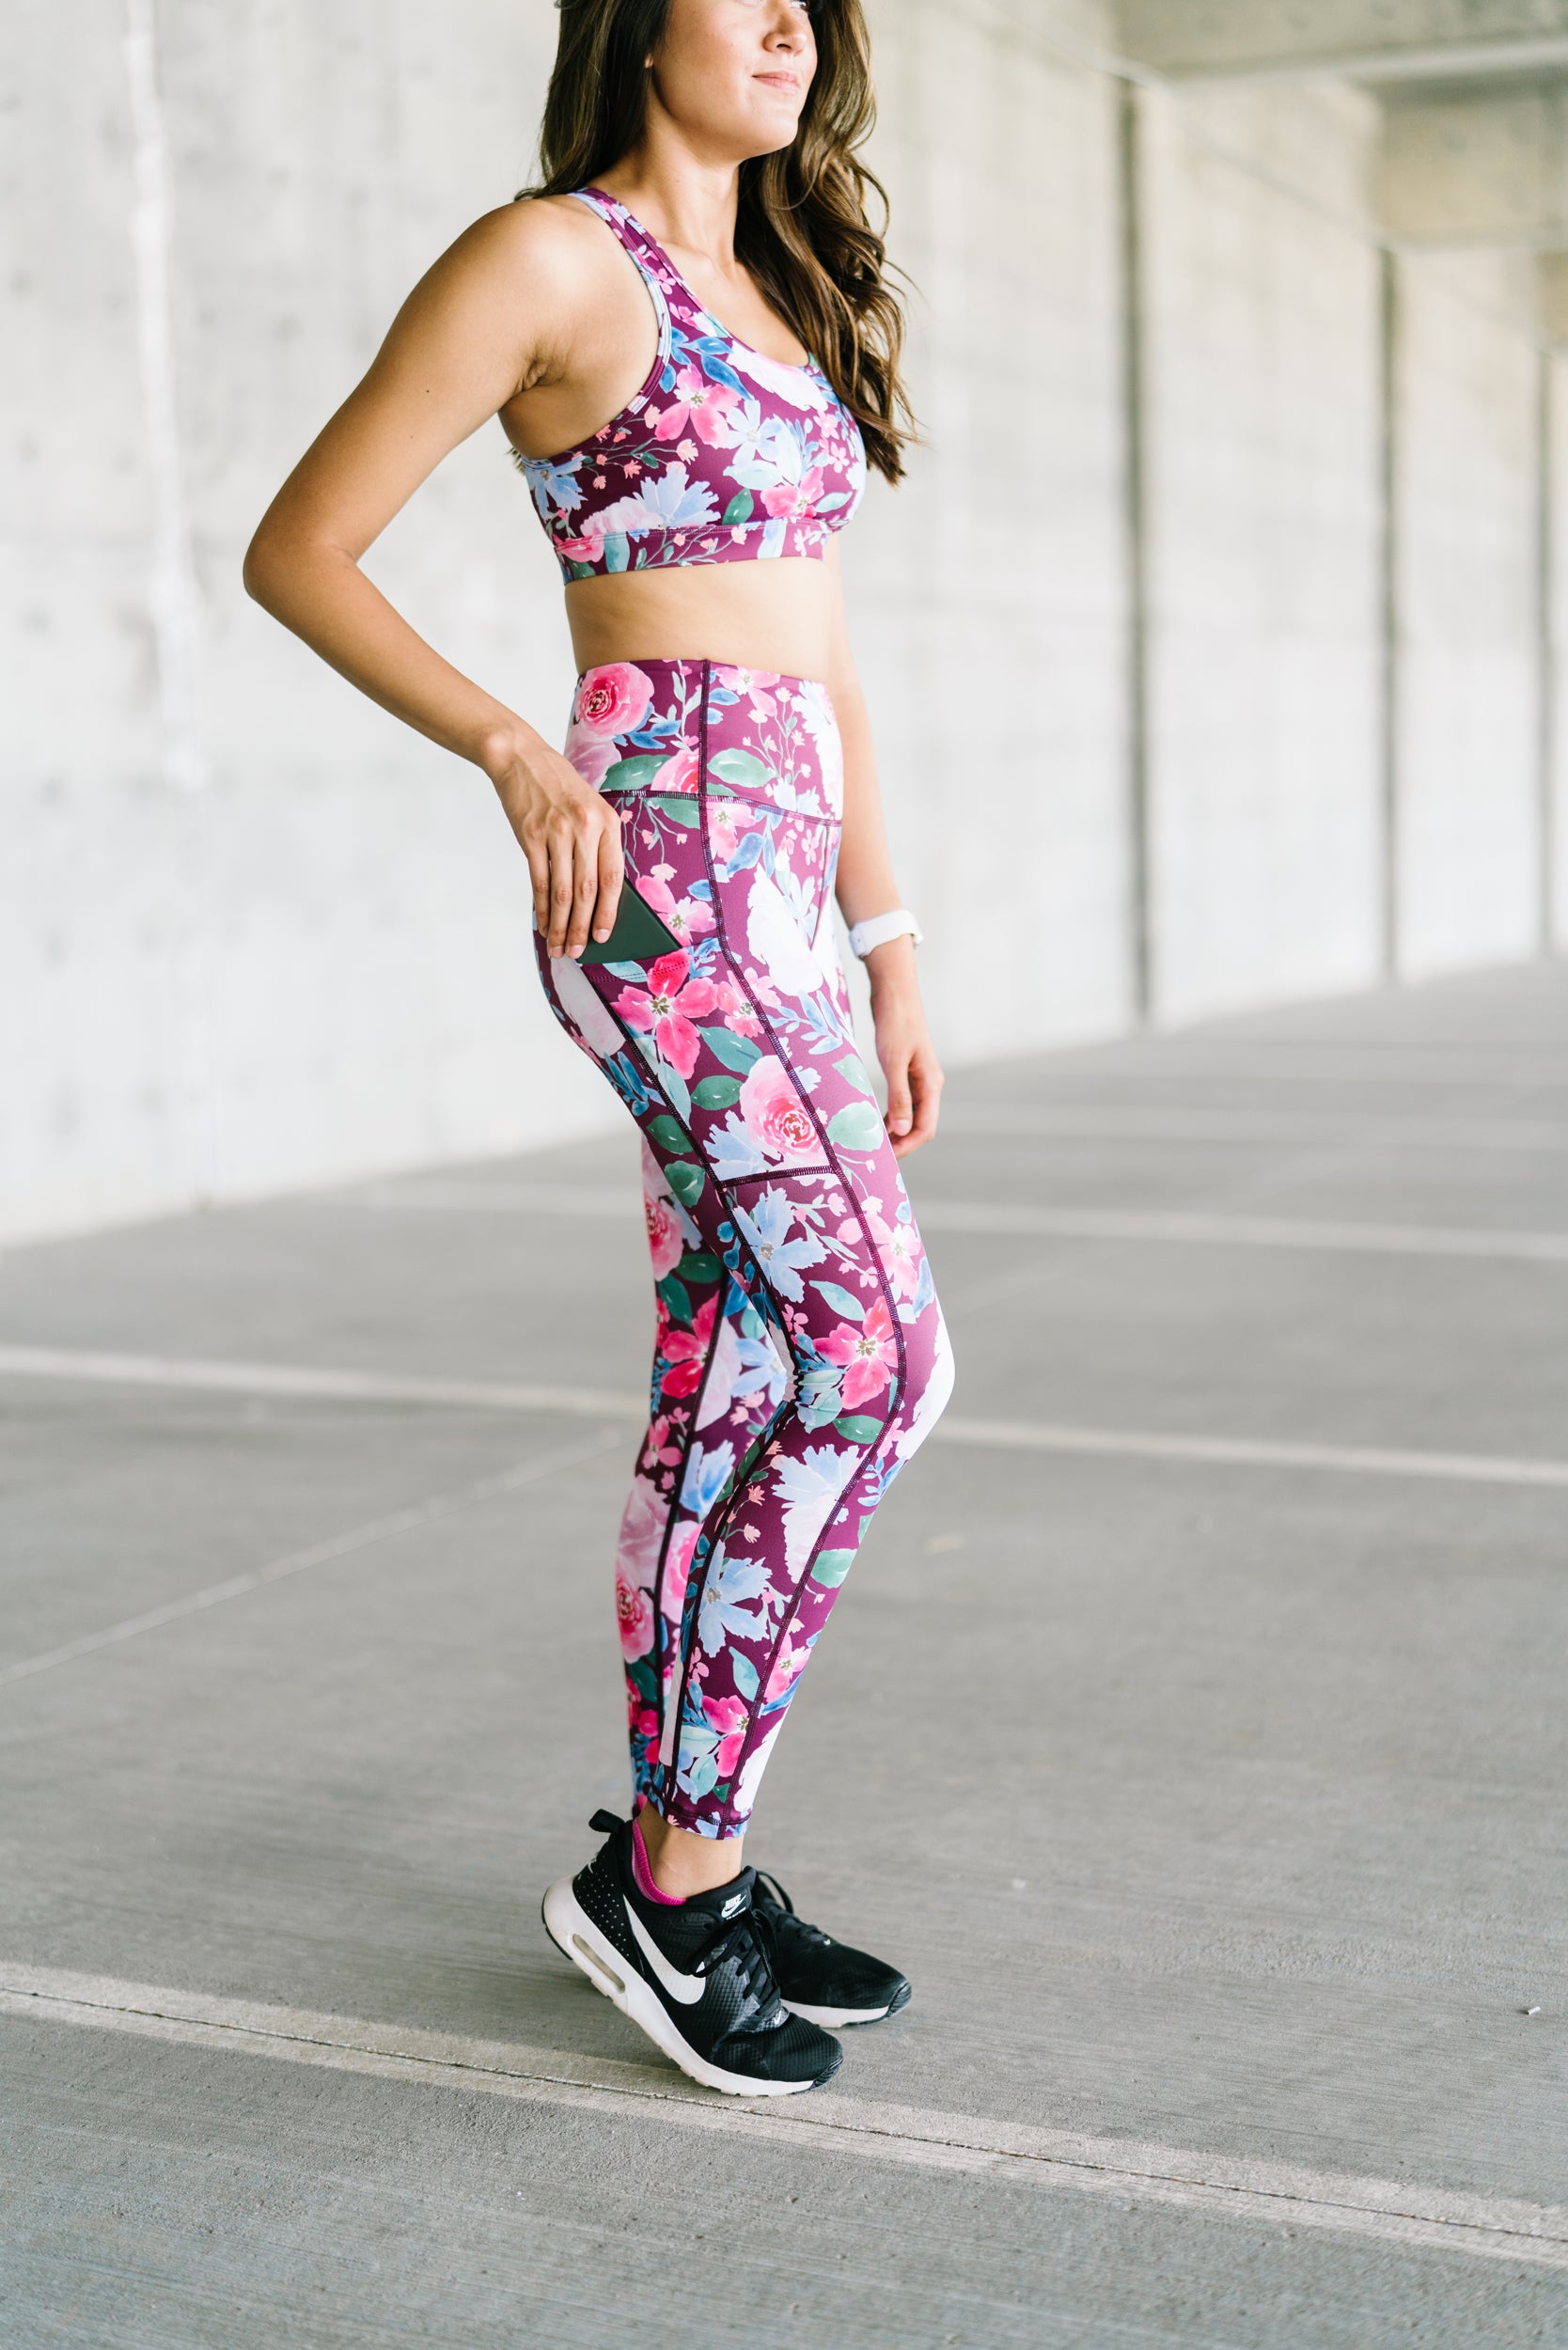 Blooming Trends: Floral Leggings for Women – ∞threads